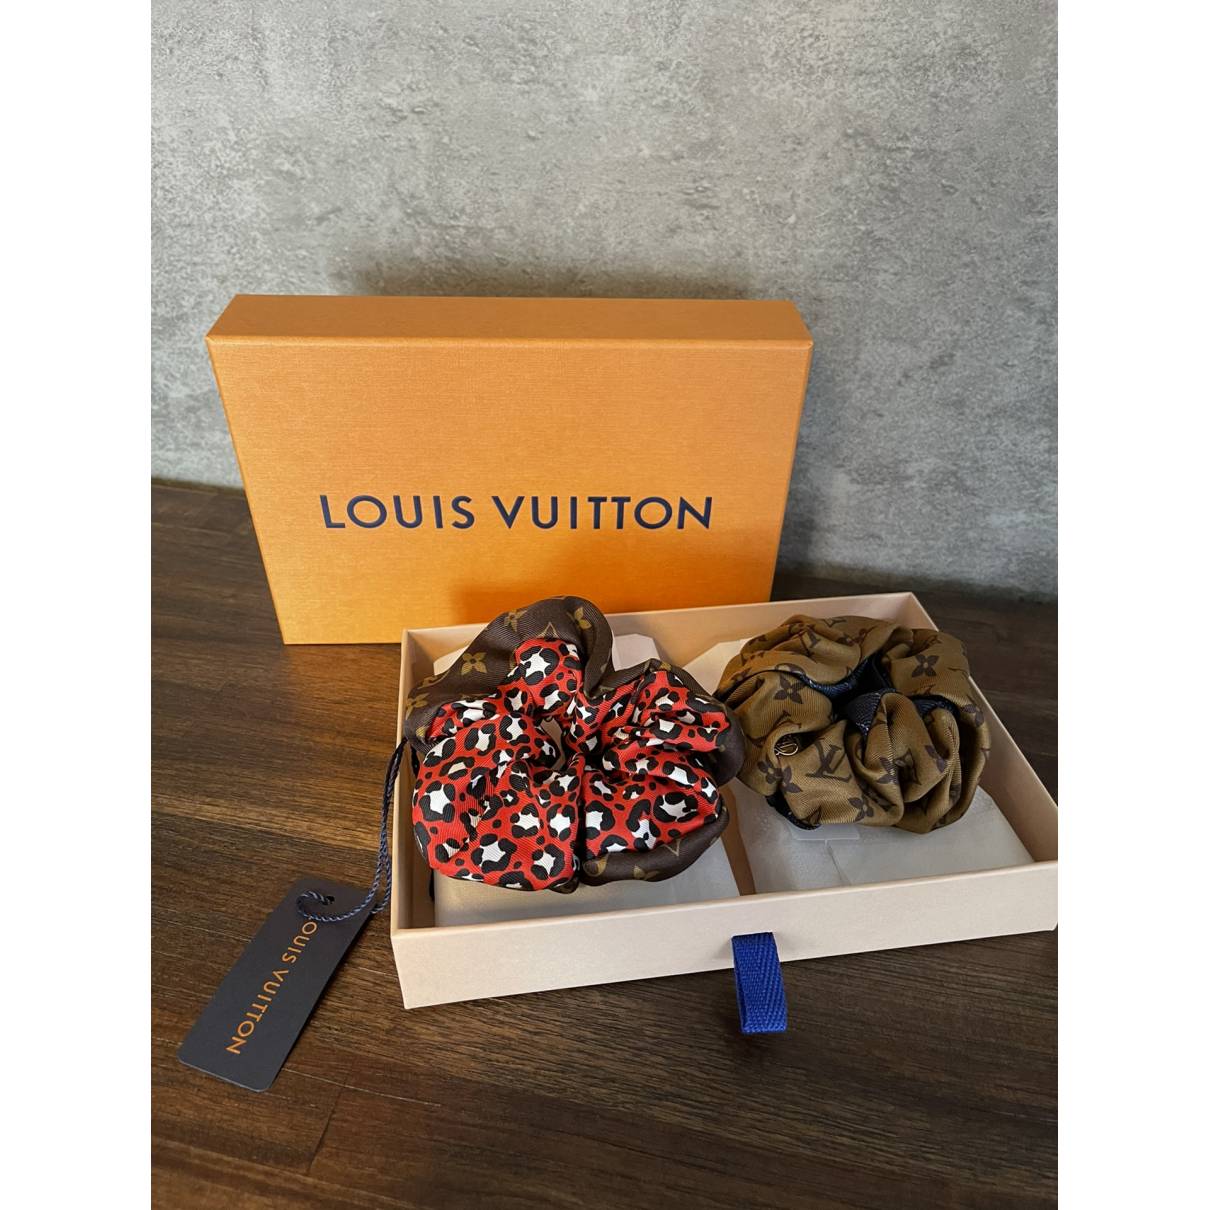 Louis Vuitton - Authenticated Monogram Hair Accessories - Silk Brown For Woman, Never Worn, with Tag